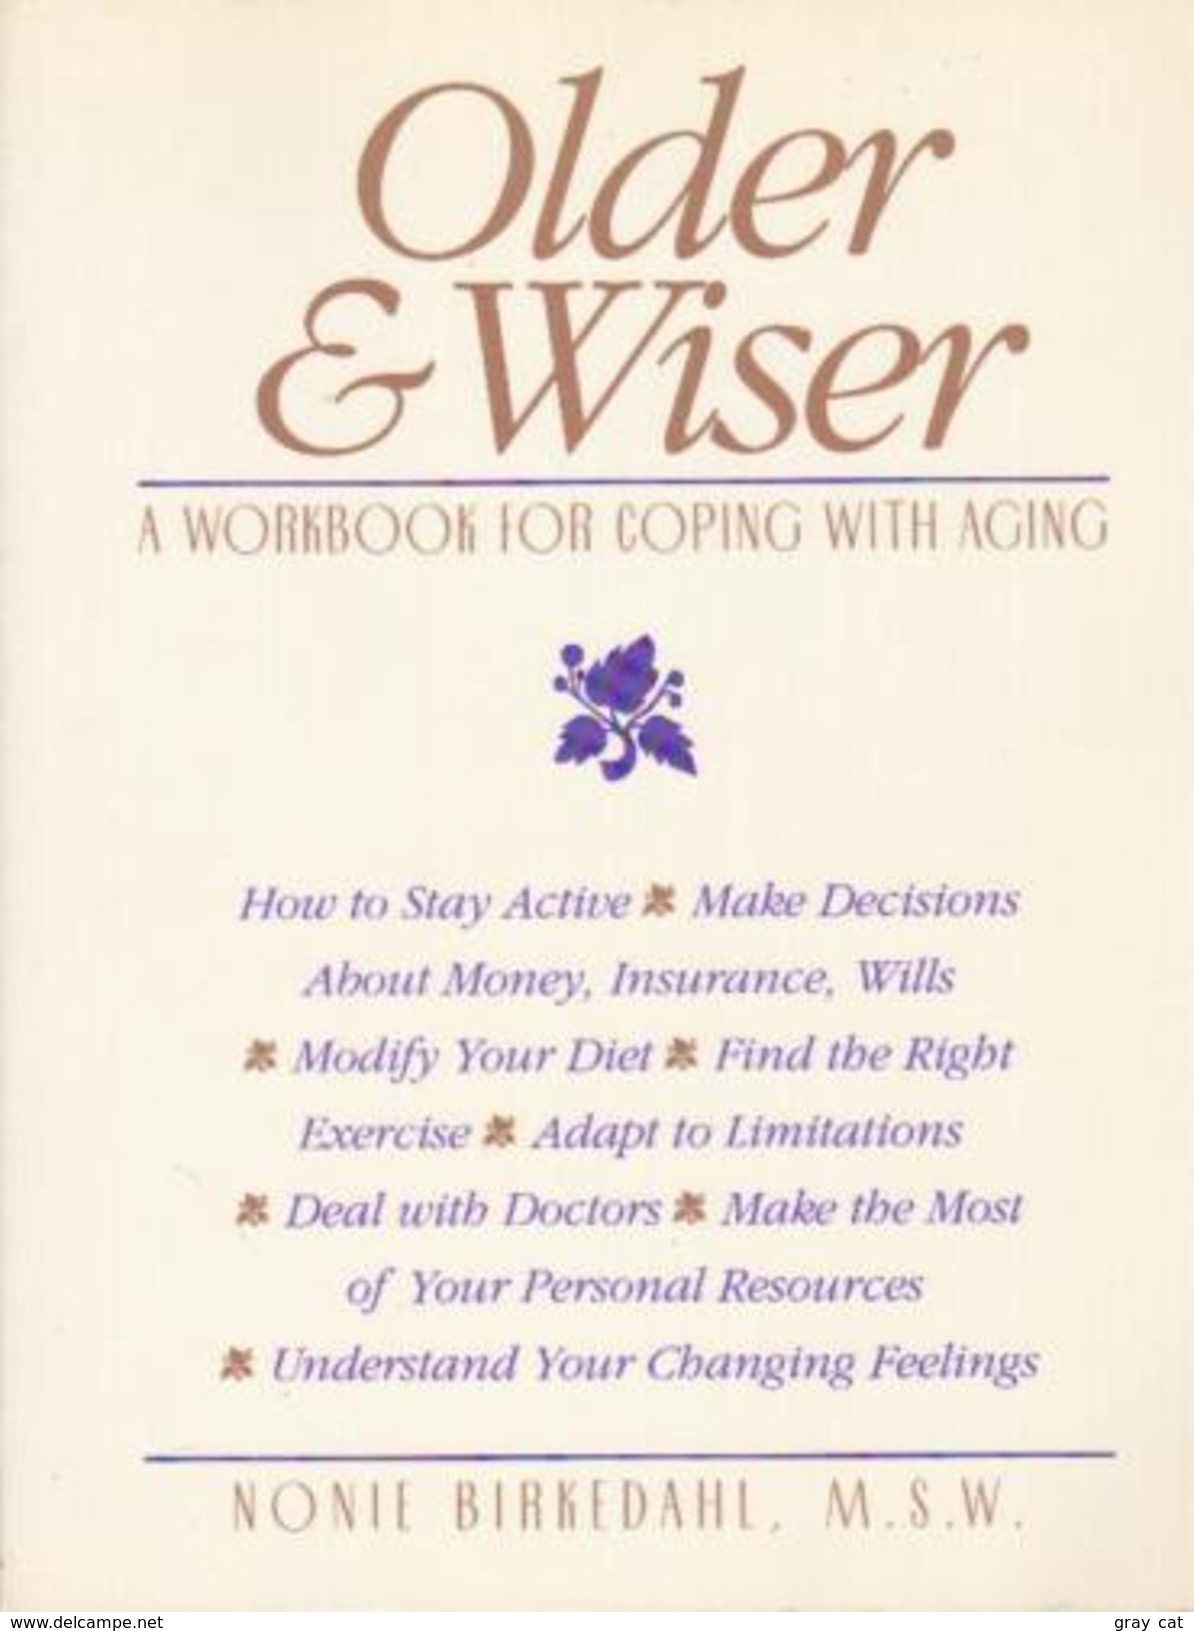 Older & Wiser: A Workbook For Coping With Aging By Nonie Birkedahl (ISBN 9781879237100) - Medicina/Puericultura